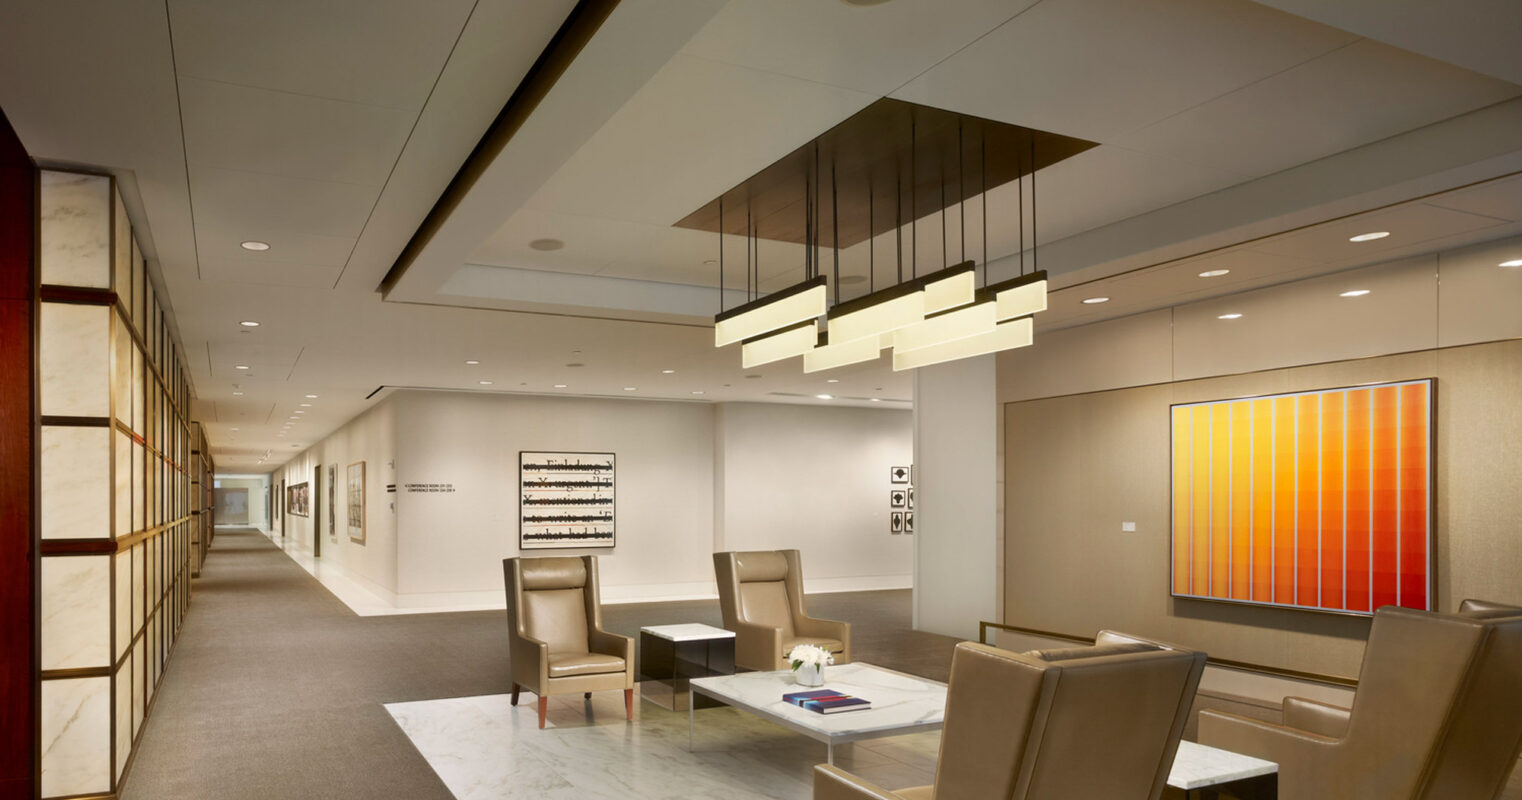 Minimalist office lobby with sleek, neutral-toned furniture, white marble floors, and linear lighting fixtures. Contemporary art adorns the walls, and a drop-down wooden accent panel adds warmth to the space.